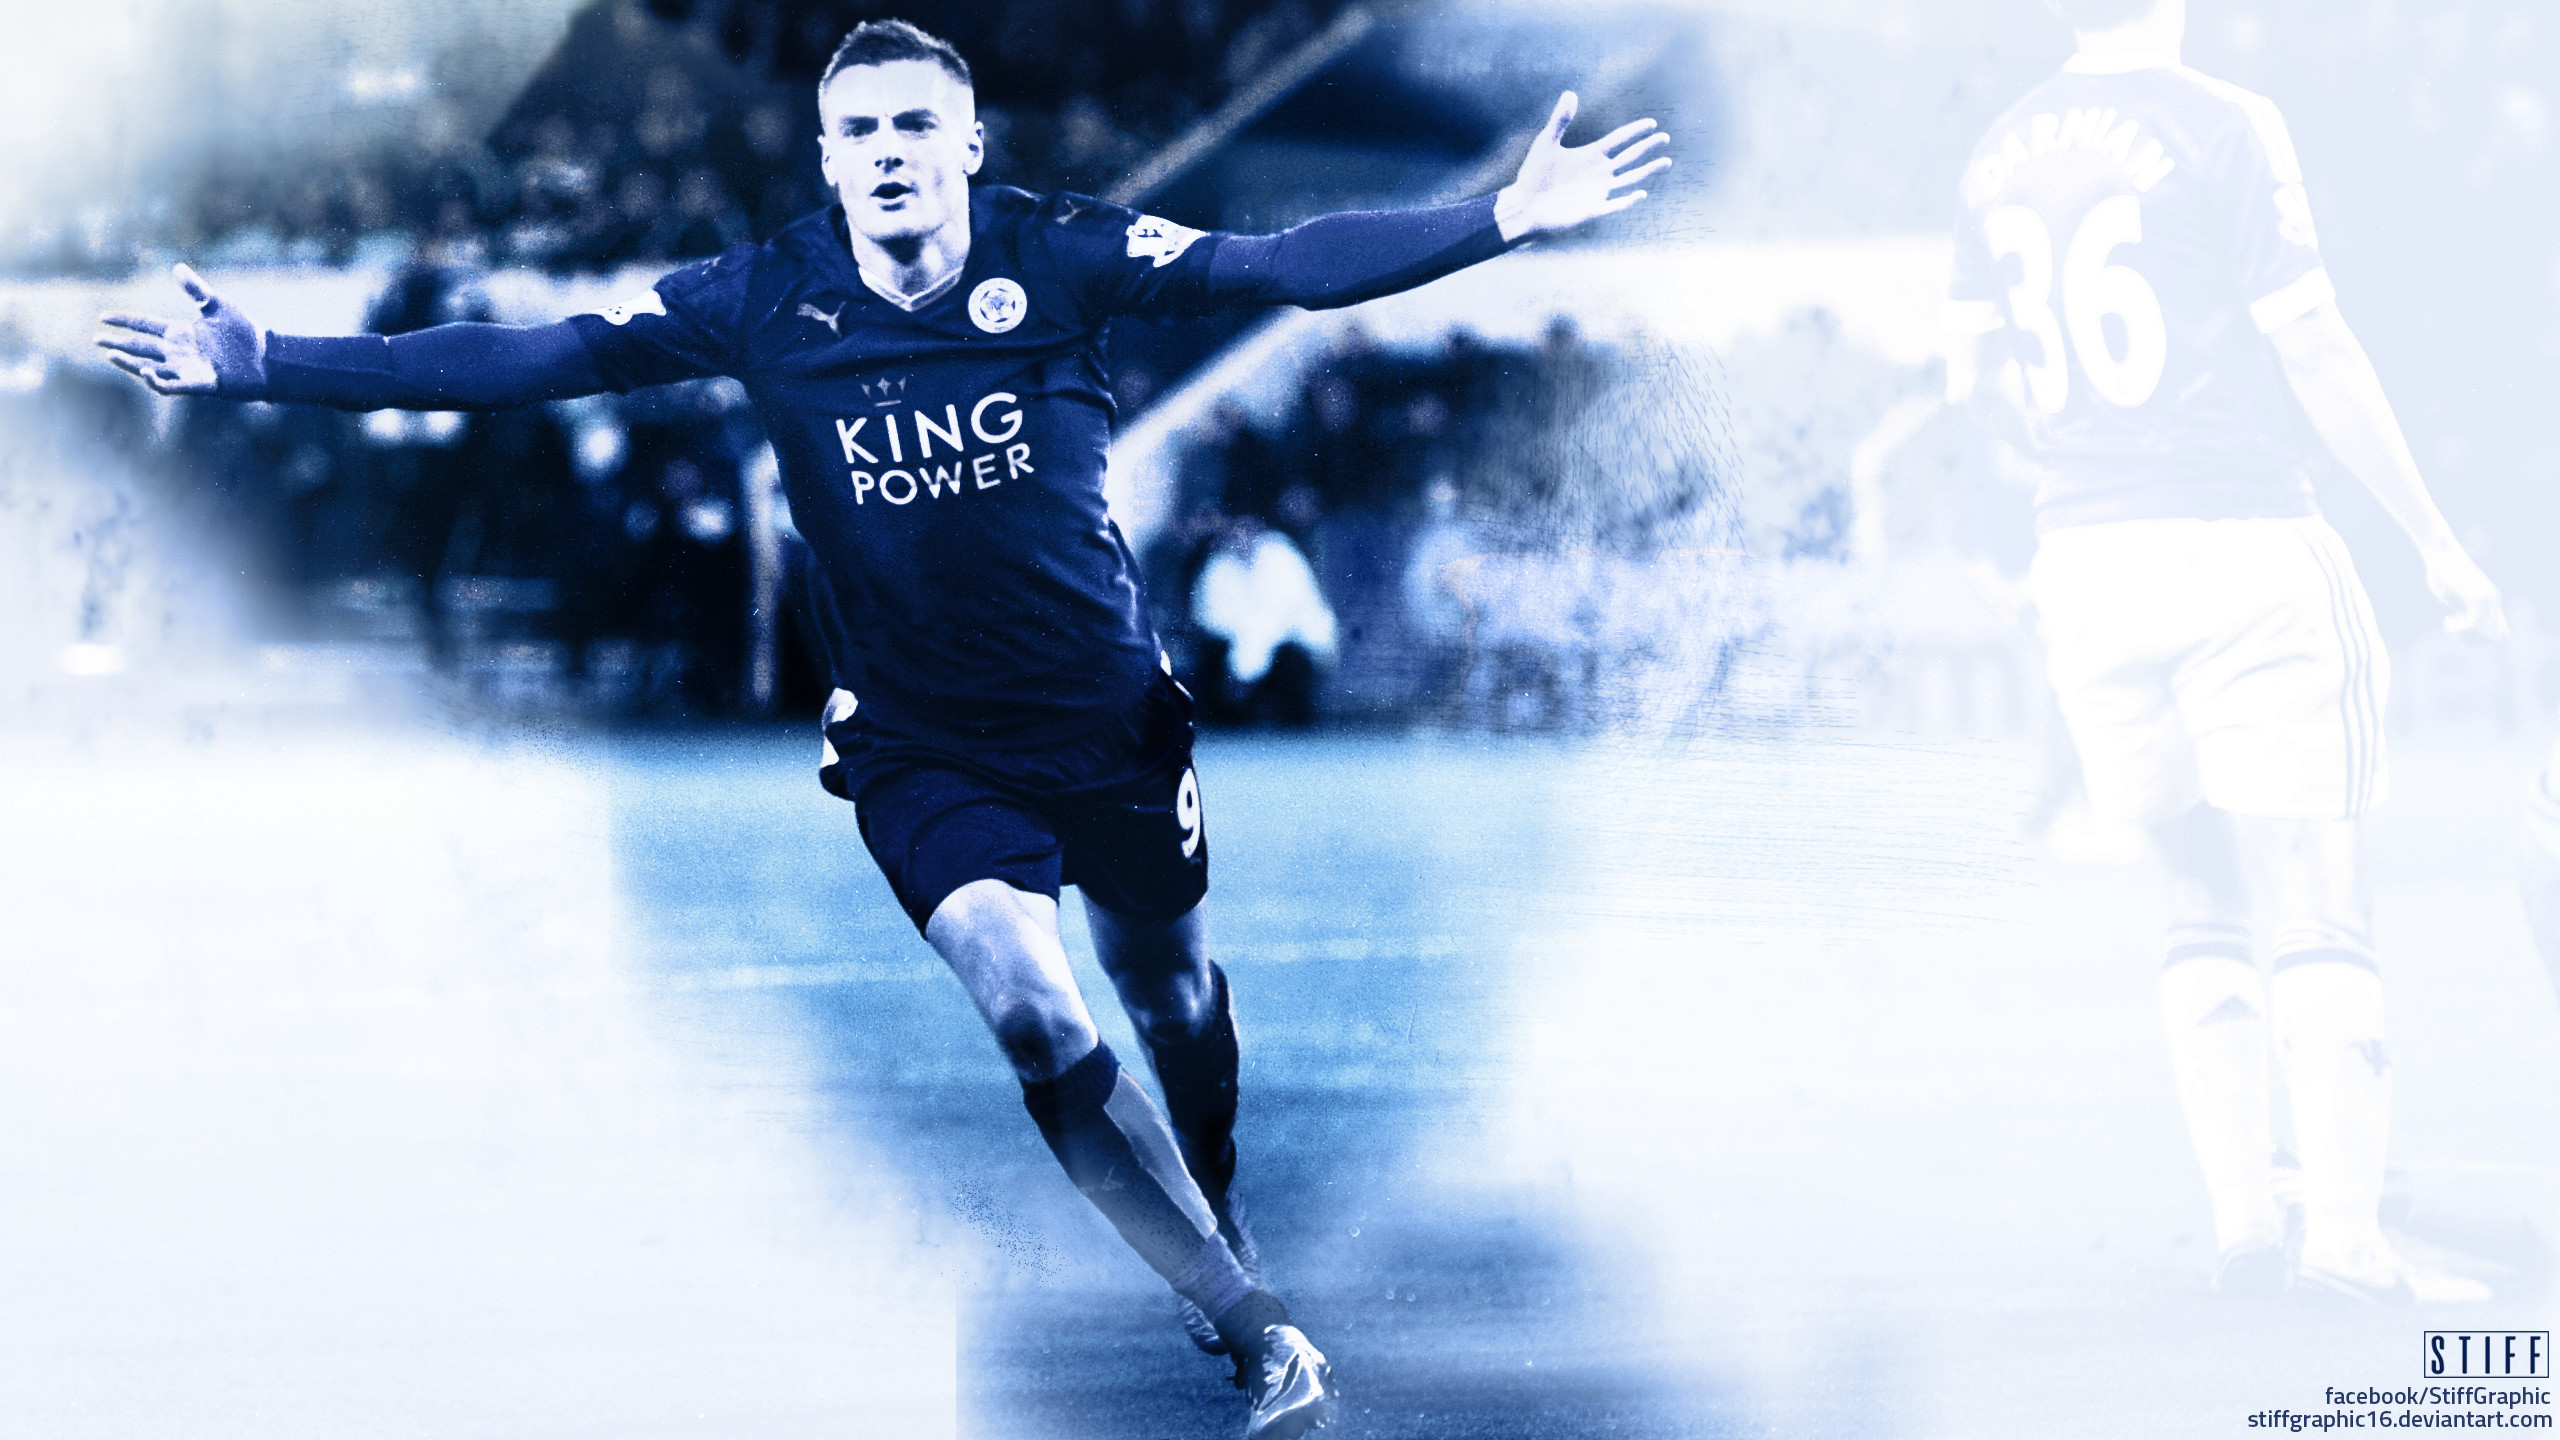 2560x1440 ... Jamie Vardy Effect - Wallpaper by stiffgraphic16